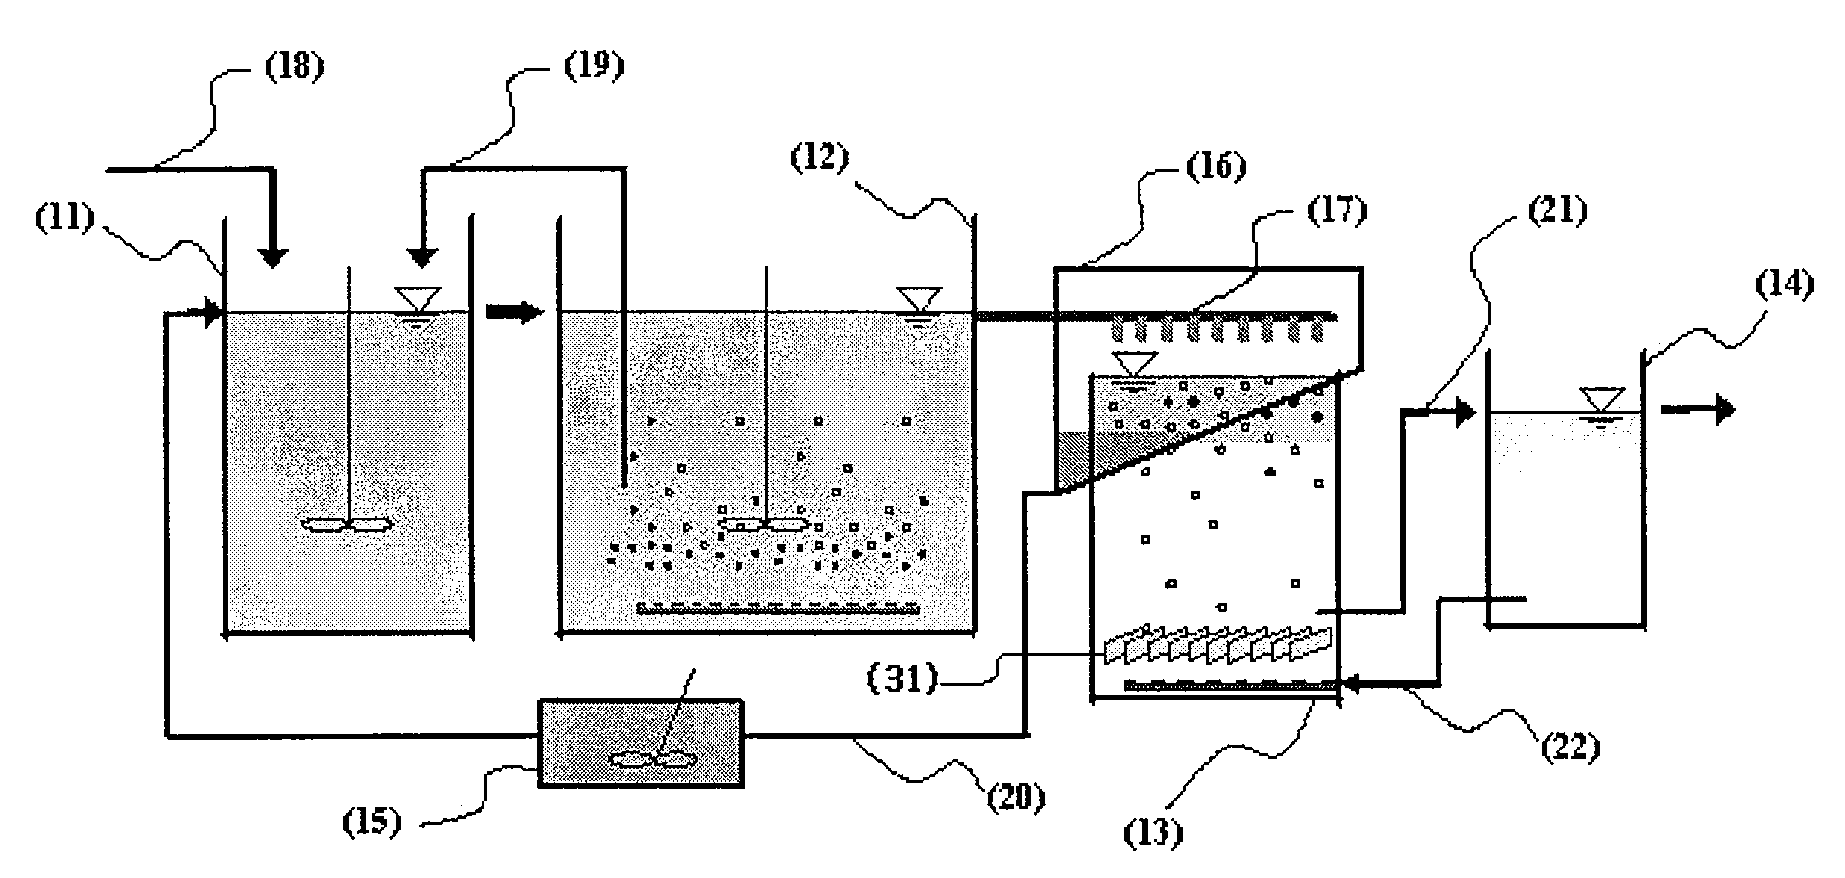 Method and apparatus for wastewater treatment using nitrogen/phosphorous removal process combined with floatation separation of activated sludge